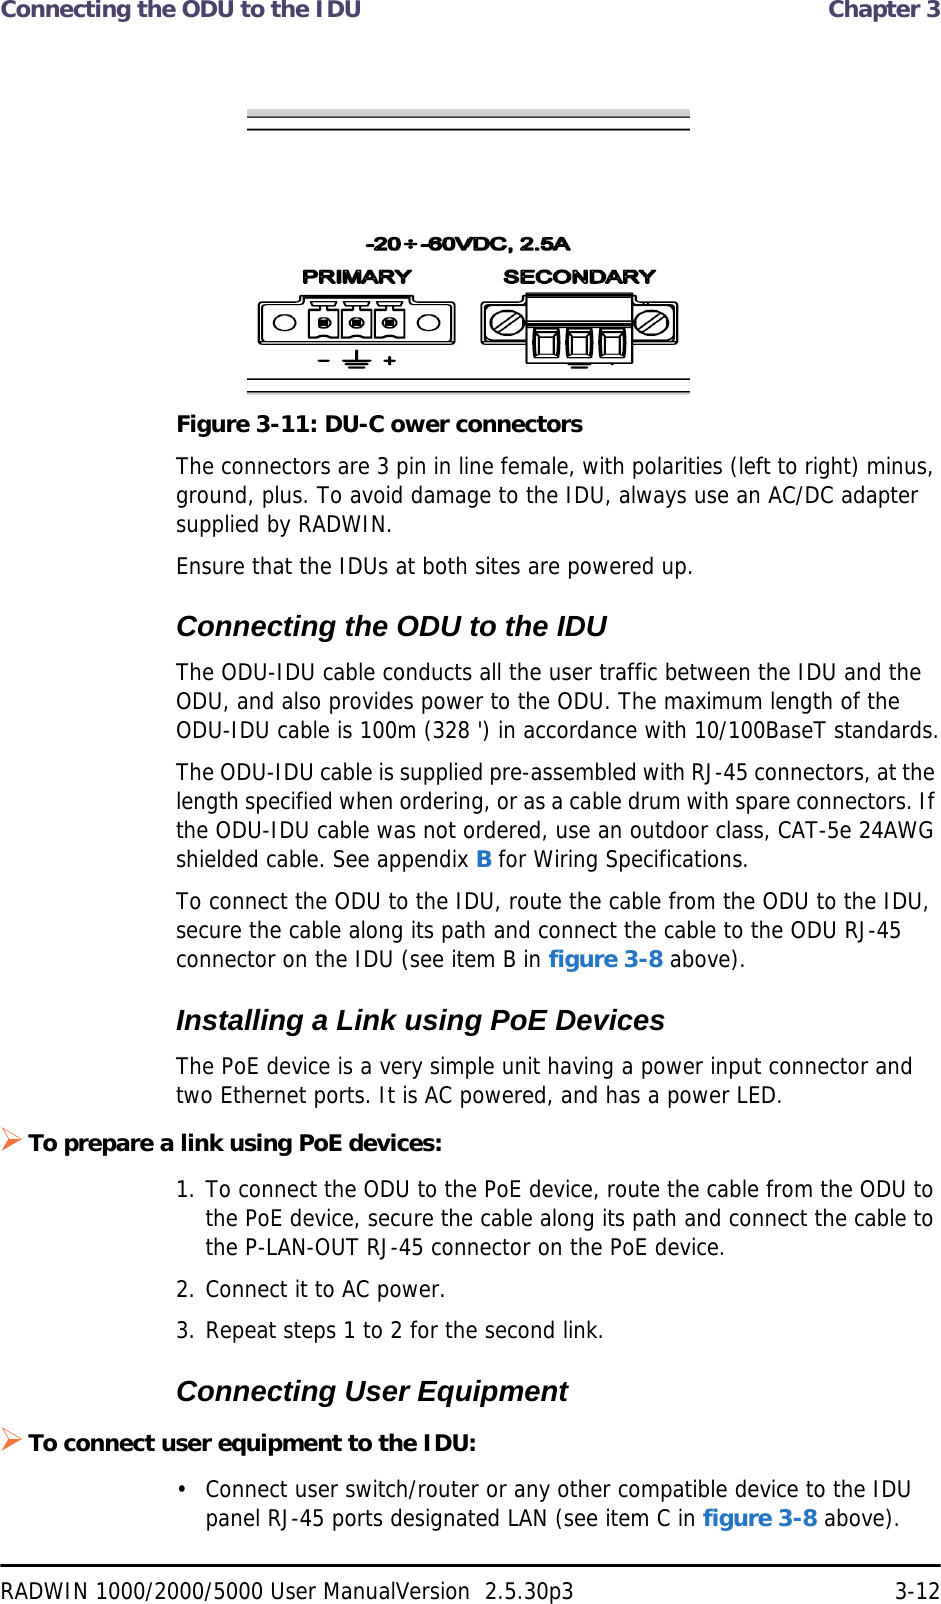 Connecting the ODU to the IDU  Chapter 3RADWIN 1000/2000/5000 User ManualVersion  2.5.30p3 3-12Figure 3-11: DU-C ower connectorsThe connectors are 3 pin in line female, with polarities (left to right) minus, ground, plus. To avoid damage to the IDU, always use an AC/DC adapter supplied by RADWIN.Ensure that the IDUs at both sites are powered up.Connecting the ODU to the IDUThe ODU-IDU cable conducts all the user traffic between the IDU and the ODU, and also provides power to the ODU. The maximum length of the ODU-IDU cable is 100m (328 &apos;) in accordance with 10/100BaseT standards.The ODU-IDU cable is supplied pre-assembled with RJ-45 connectors, at the length specified when ordering, or as a cable drum with spare connectors. If the ODU-IDU cable was not ordered, use an outdoor class, CAT-5e 24AWG shielded cable. See appendix B for Wiring Specifications.To connect the ODU to the IDU, route the cable from the ODU to the IDU, secure the cable along its path and connect the cable to the ODU RJ-45 connector on the IDU (see item B in figure 3-8 above).Installing a Link using PoE DevicesThe PoE device is a very simple unit having a power input connector and two Ethernet ports. It is AC powered, and has a power LED.To prepare a link using PoE devices:1. To connect the ODU to the PoE device, route the cable from the ODU to the PoE device, secure the cable along its path and connect the cable to the P-LAN-OUT RJ-45 connector on the PoE device.2. Connect it to AC power.3. Repeat steps 1 to 2 for the second link.Connecting User EquipmentTo connect user equipment to the IDU:• Connect user switch/router or any other compatible device to the IDU panel RJ-45 ports designated LAN (see item C in figure 3-8 above).